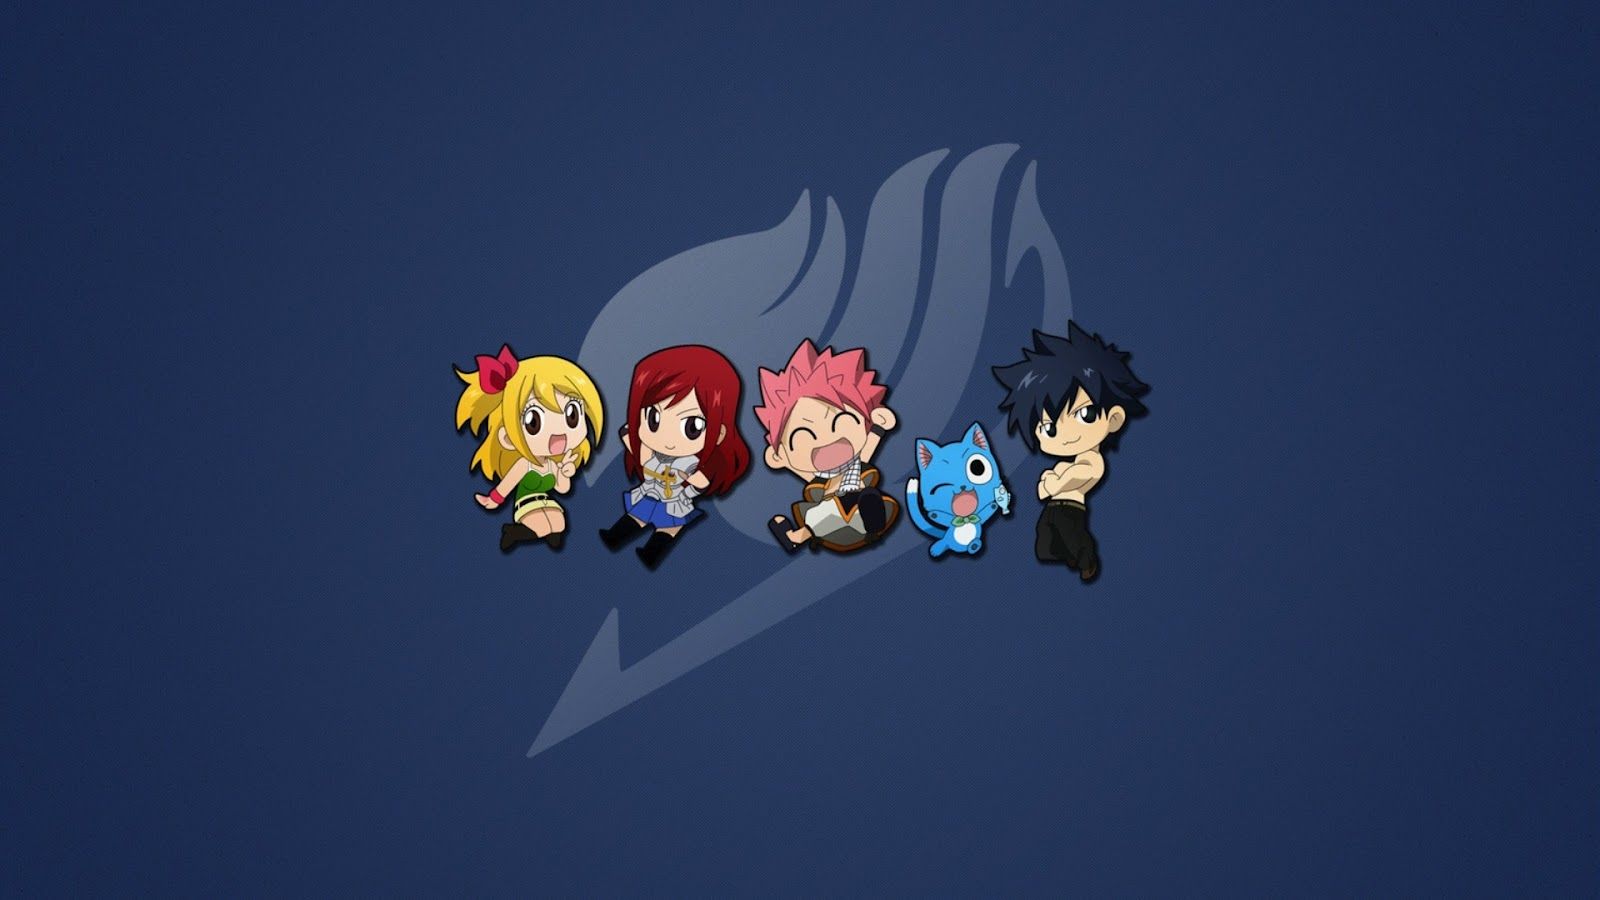 Fairy Tail Wallpaper HD 2016 | Wallpapers, Backgrounds, Images ...